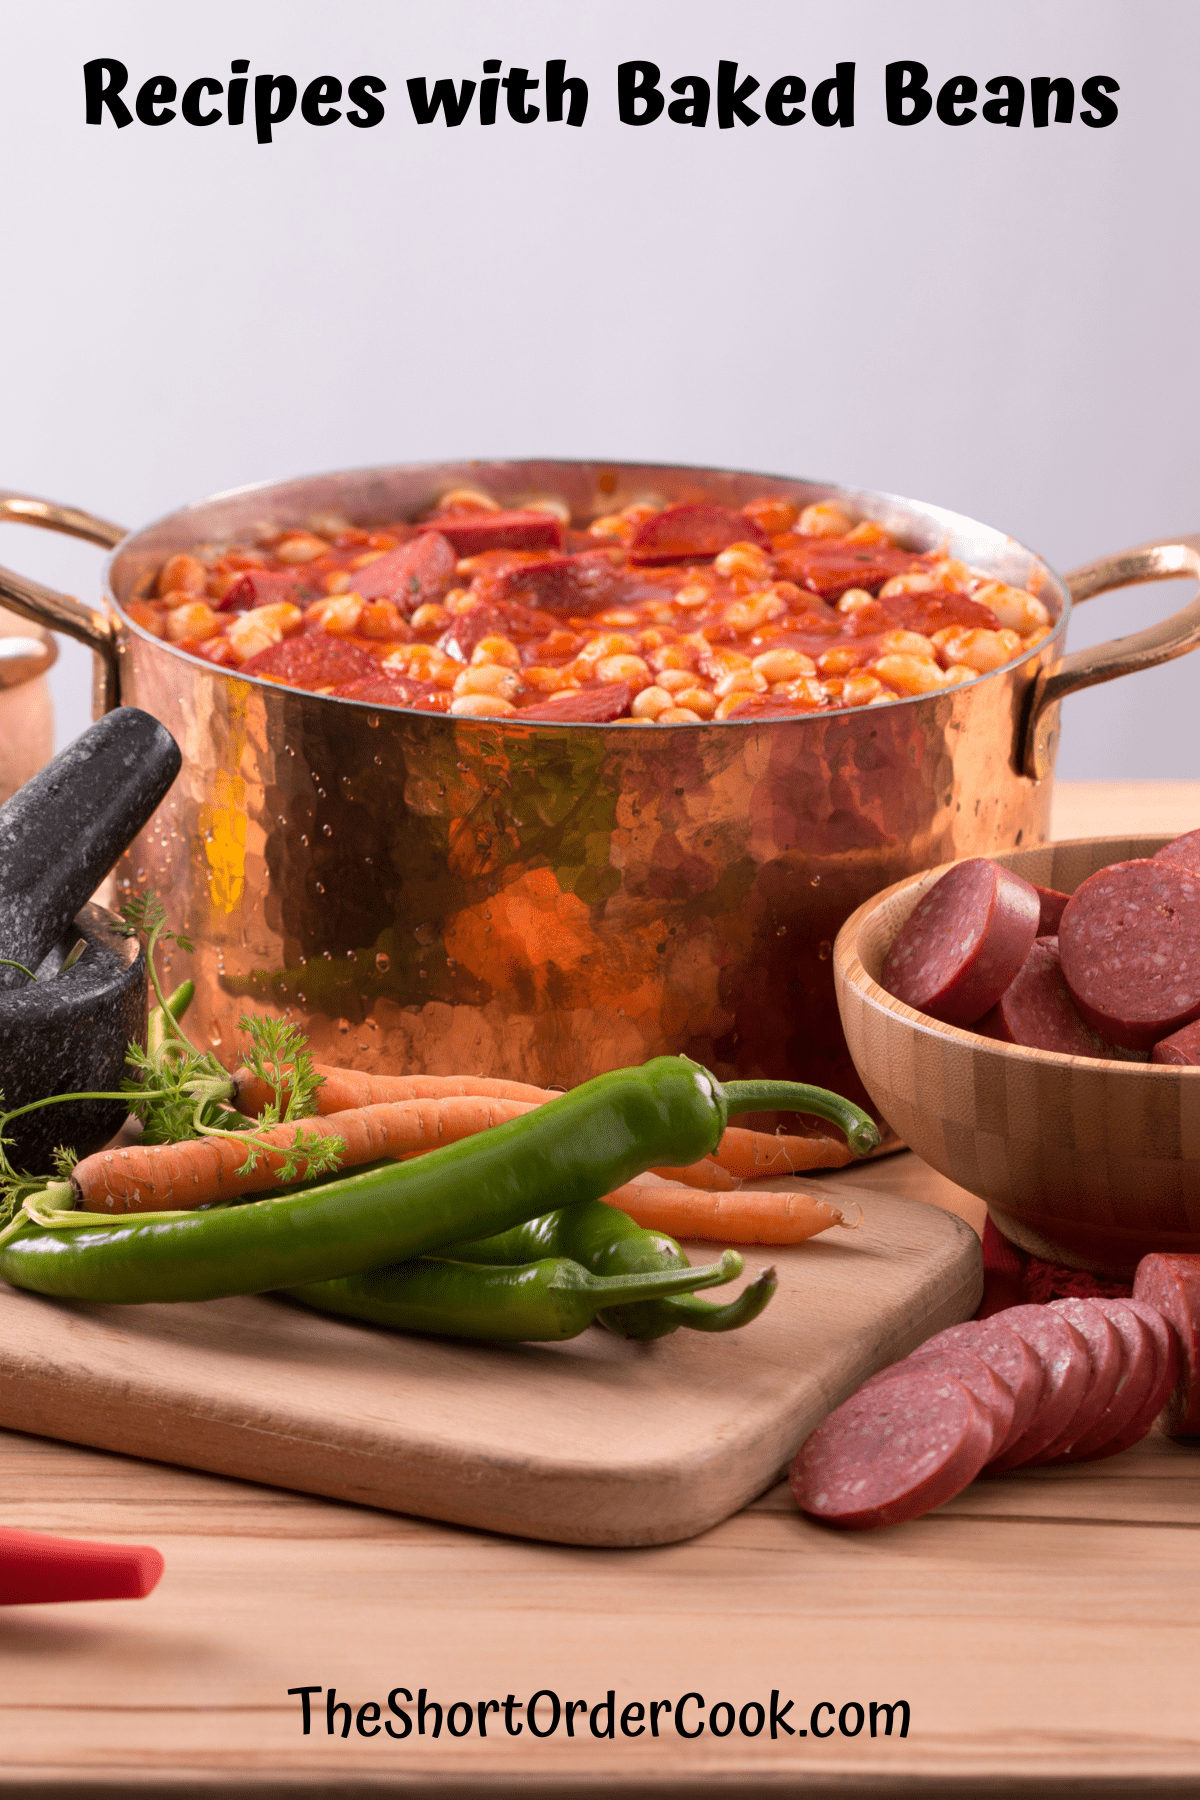 A pot of baked beans surrounded by other ingredients.